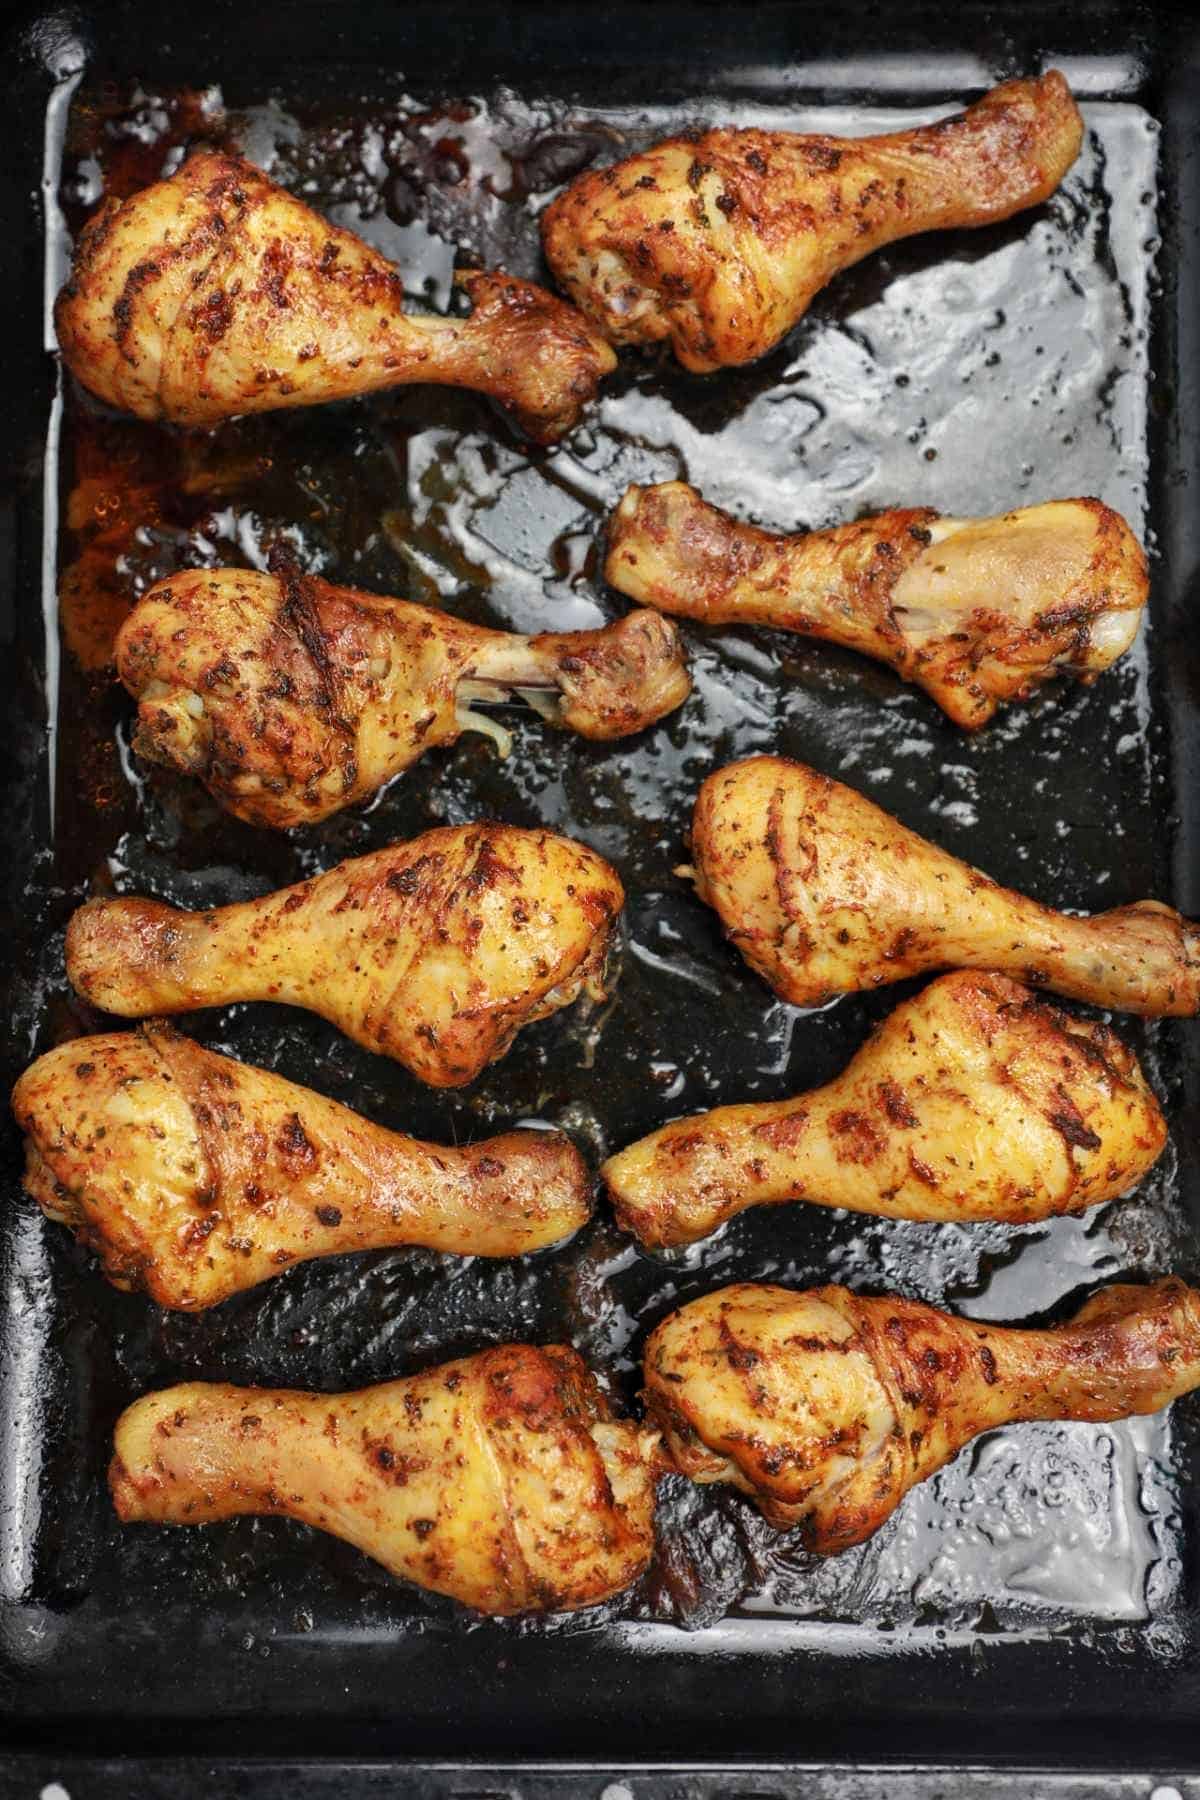 Baked chicken drumsticks on a tray.